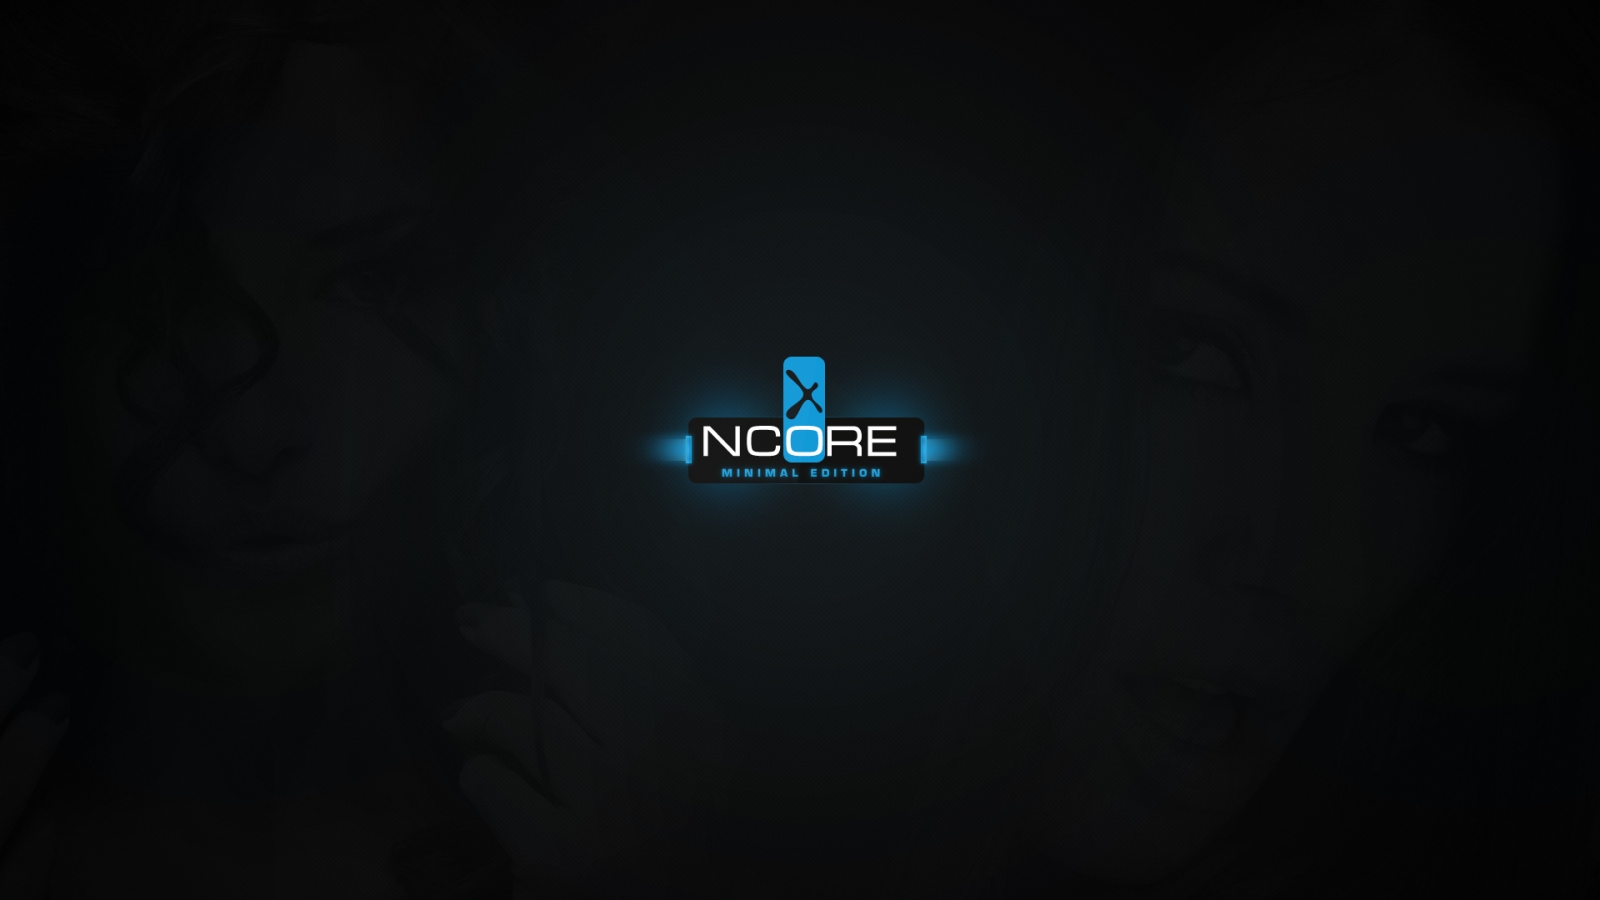 Ncore Edition for 1600 x 900 HDTV resolution